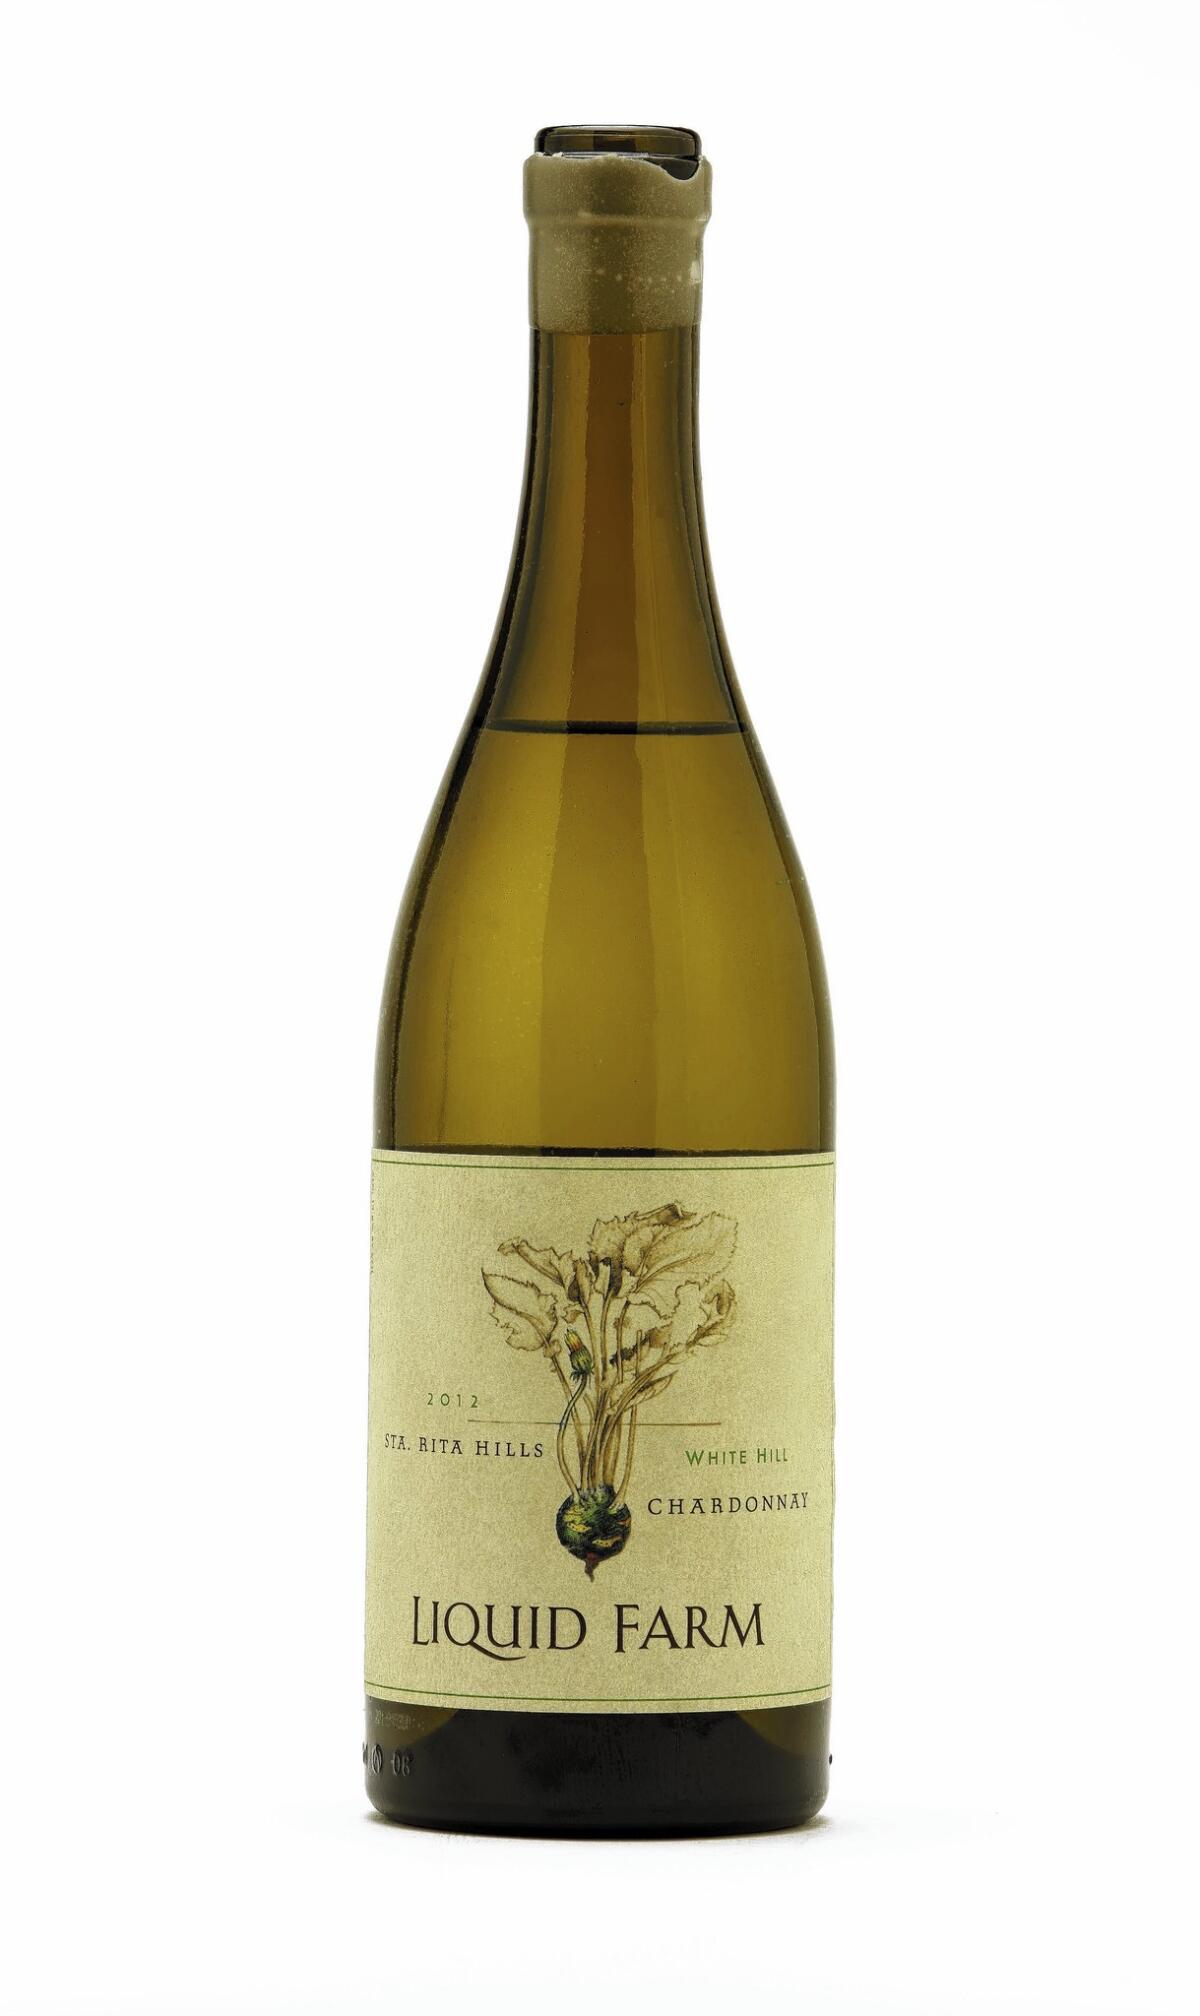 The 2012 Liquid Farm “White Hill” Chardonnay is a beautiful wine, thrilling and vibrant.